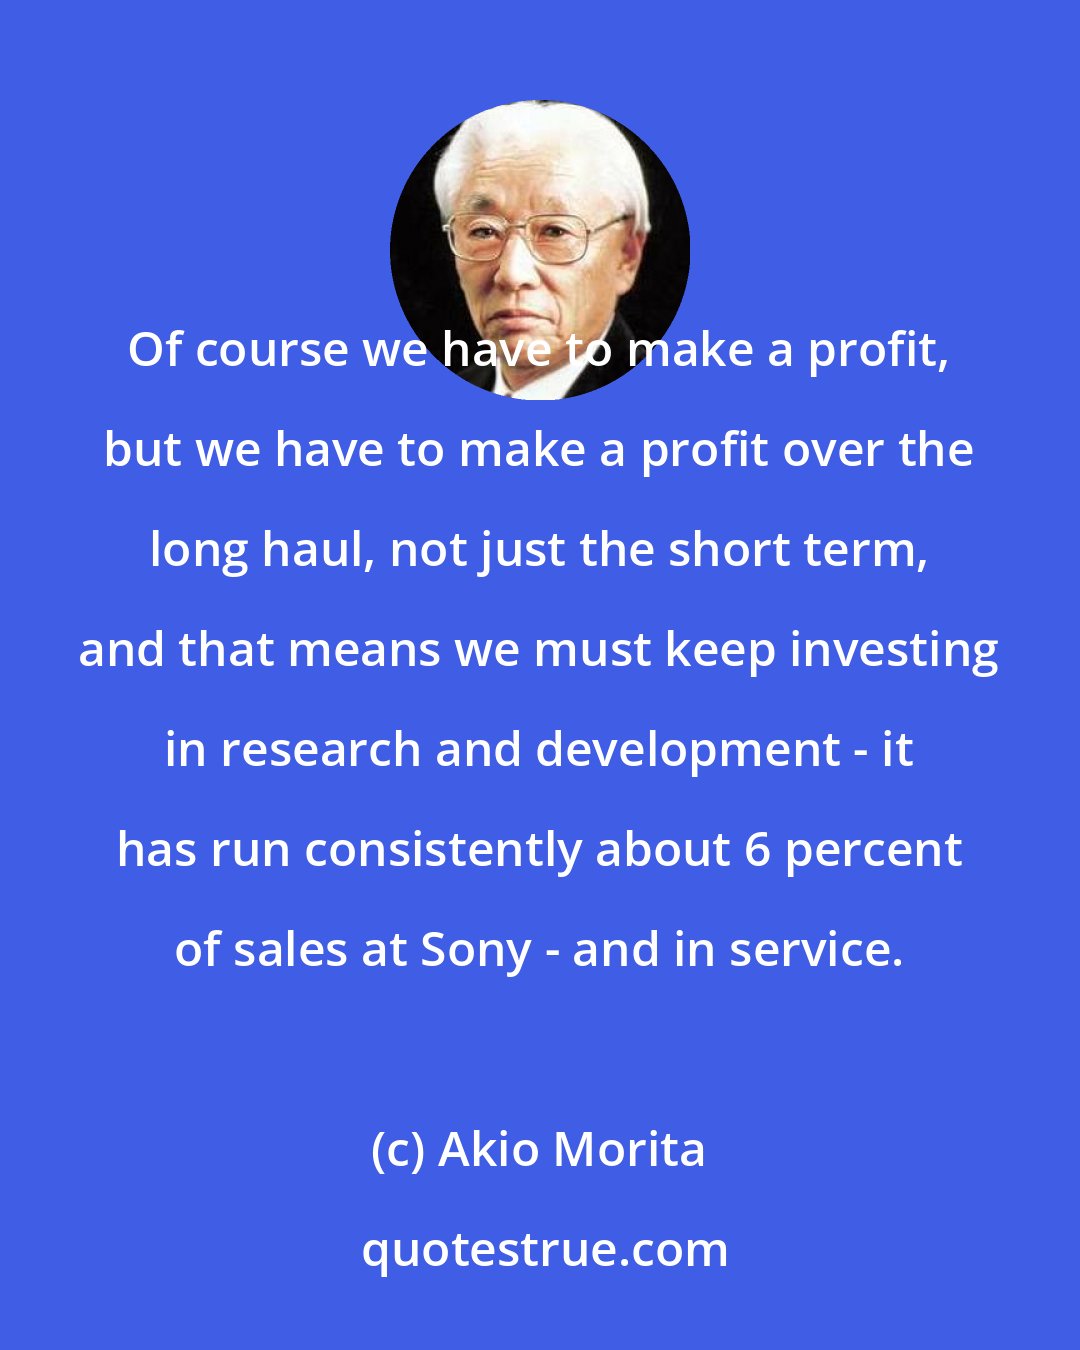 Akio Morita: Of course we have to make a profit, but we have to make a profit over the long haul, not just the short term, and that means we must keep investing in research and development - it has run consistently about 6 percent of sales at Sony - and in service.